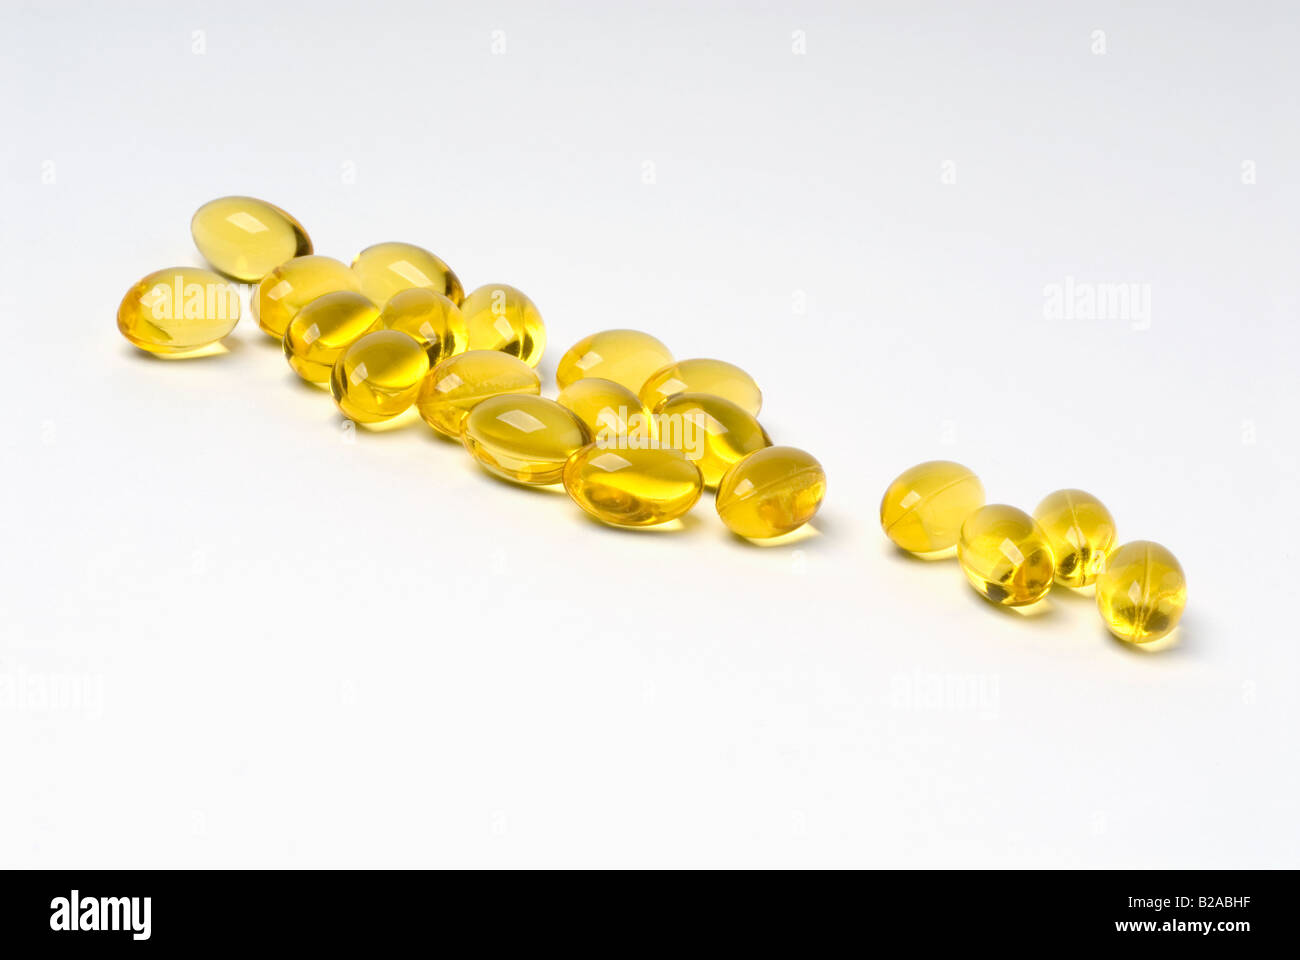 Omega-3 and Omega-6 liquid vitamin supplement capsules for nutrition and brain and eye function Stock Photo